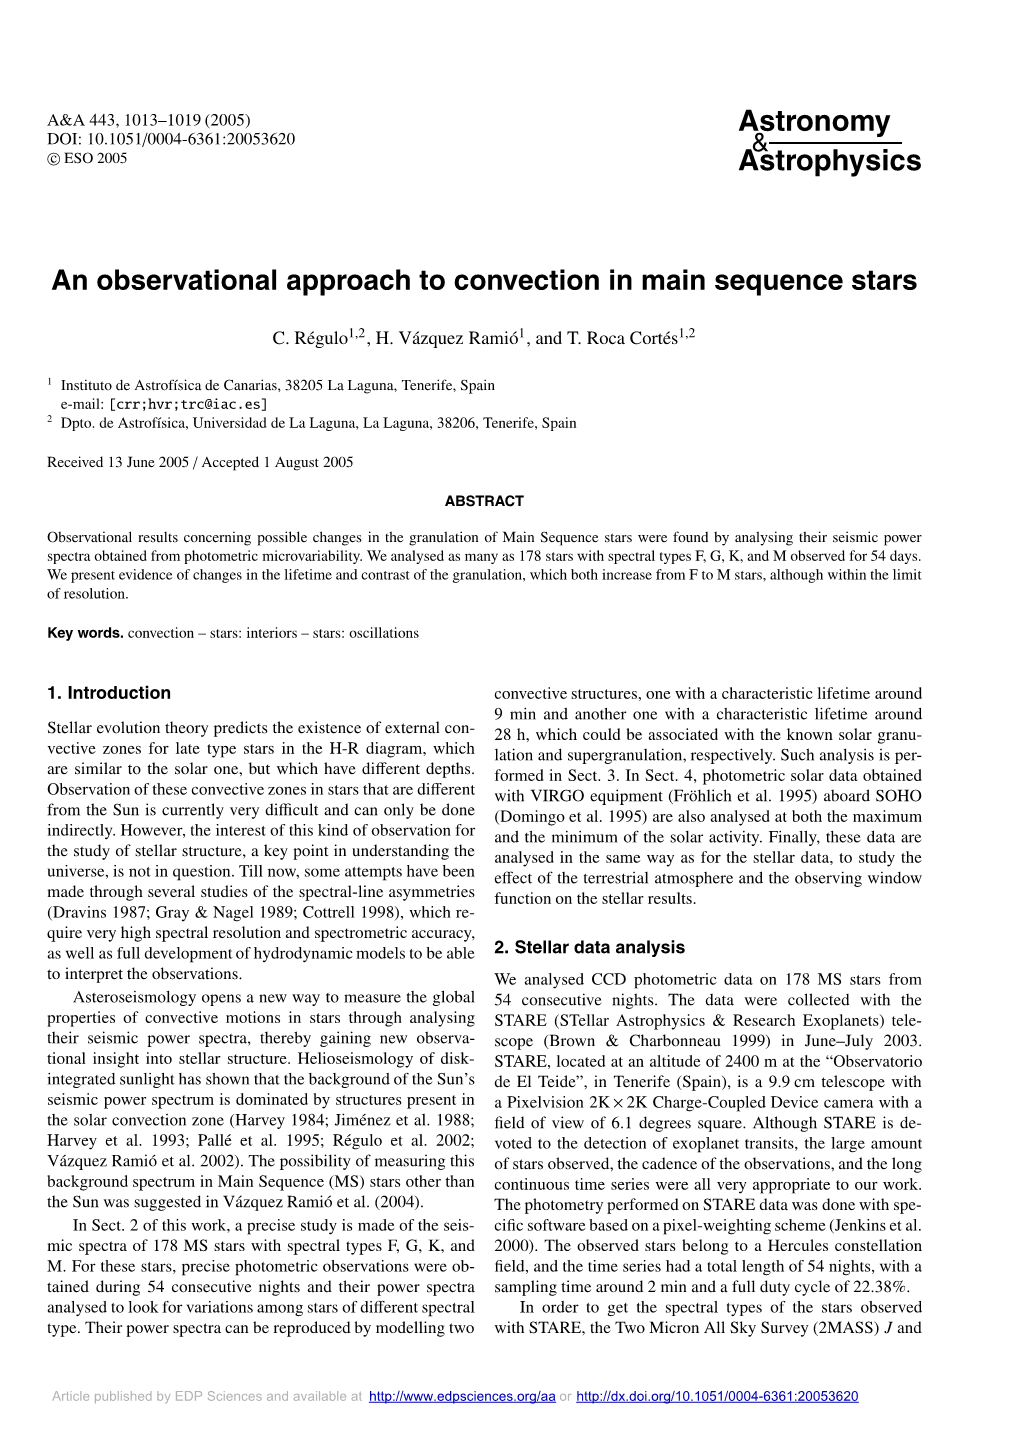 An Observational Approach to Convection in Main Sequence Stars